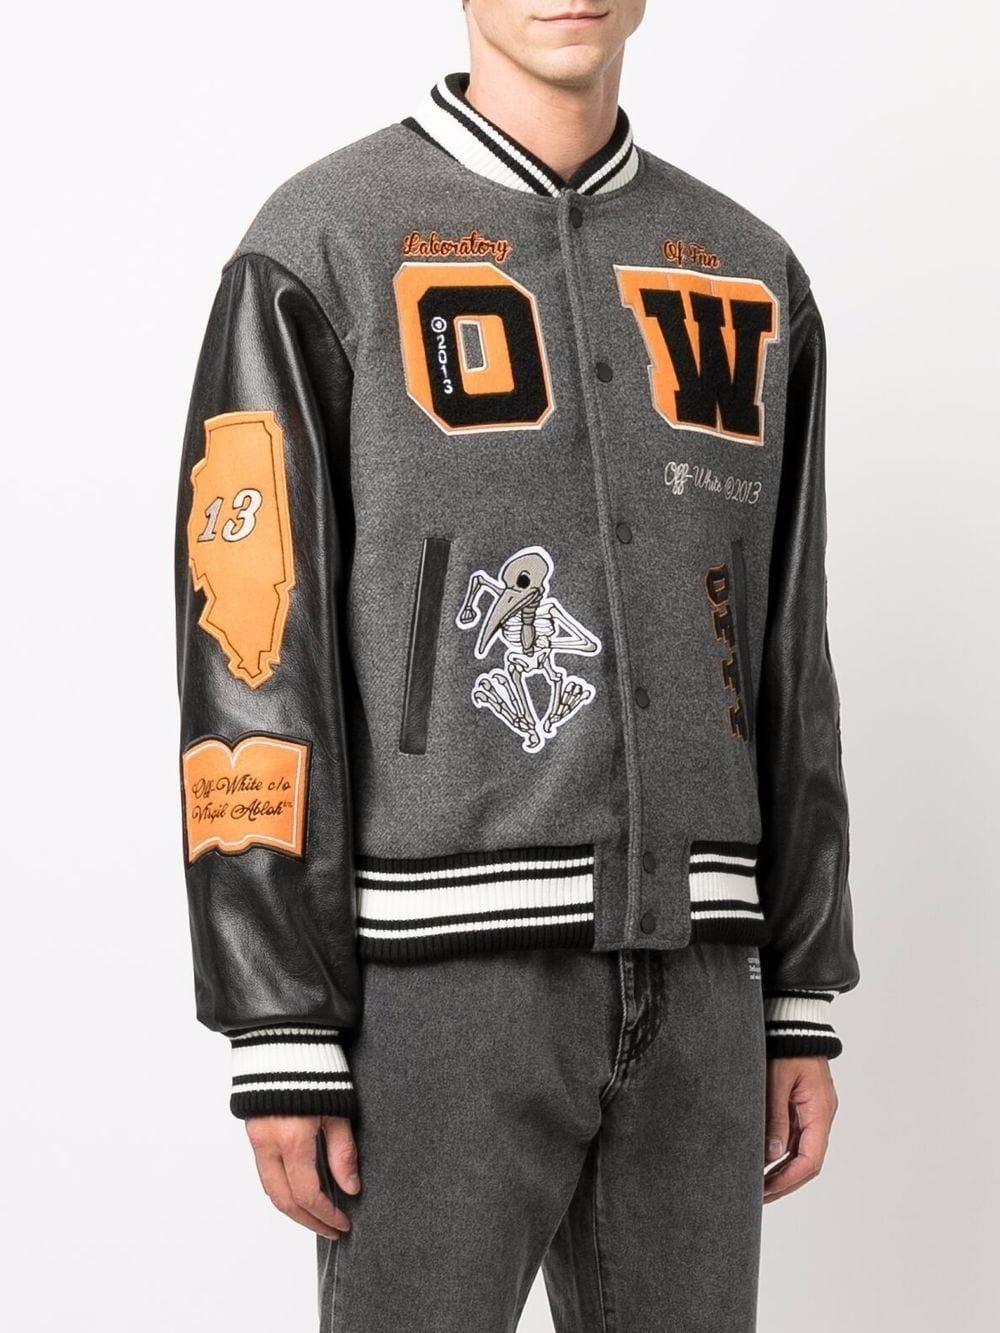 Off-White Virgil Abloh Leather Jacket in Grey (Gray) for Men - Save 49% - Lyst